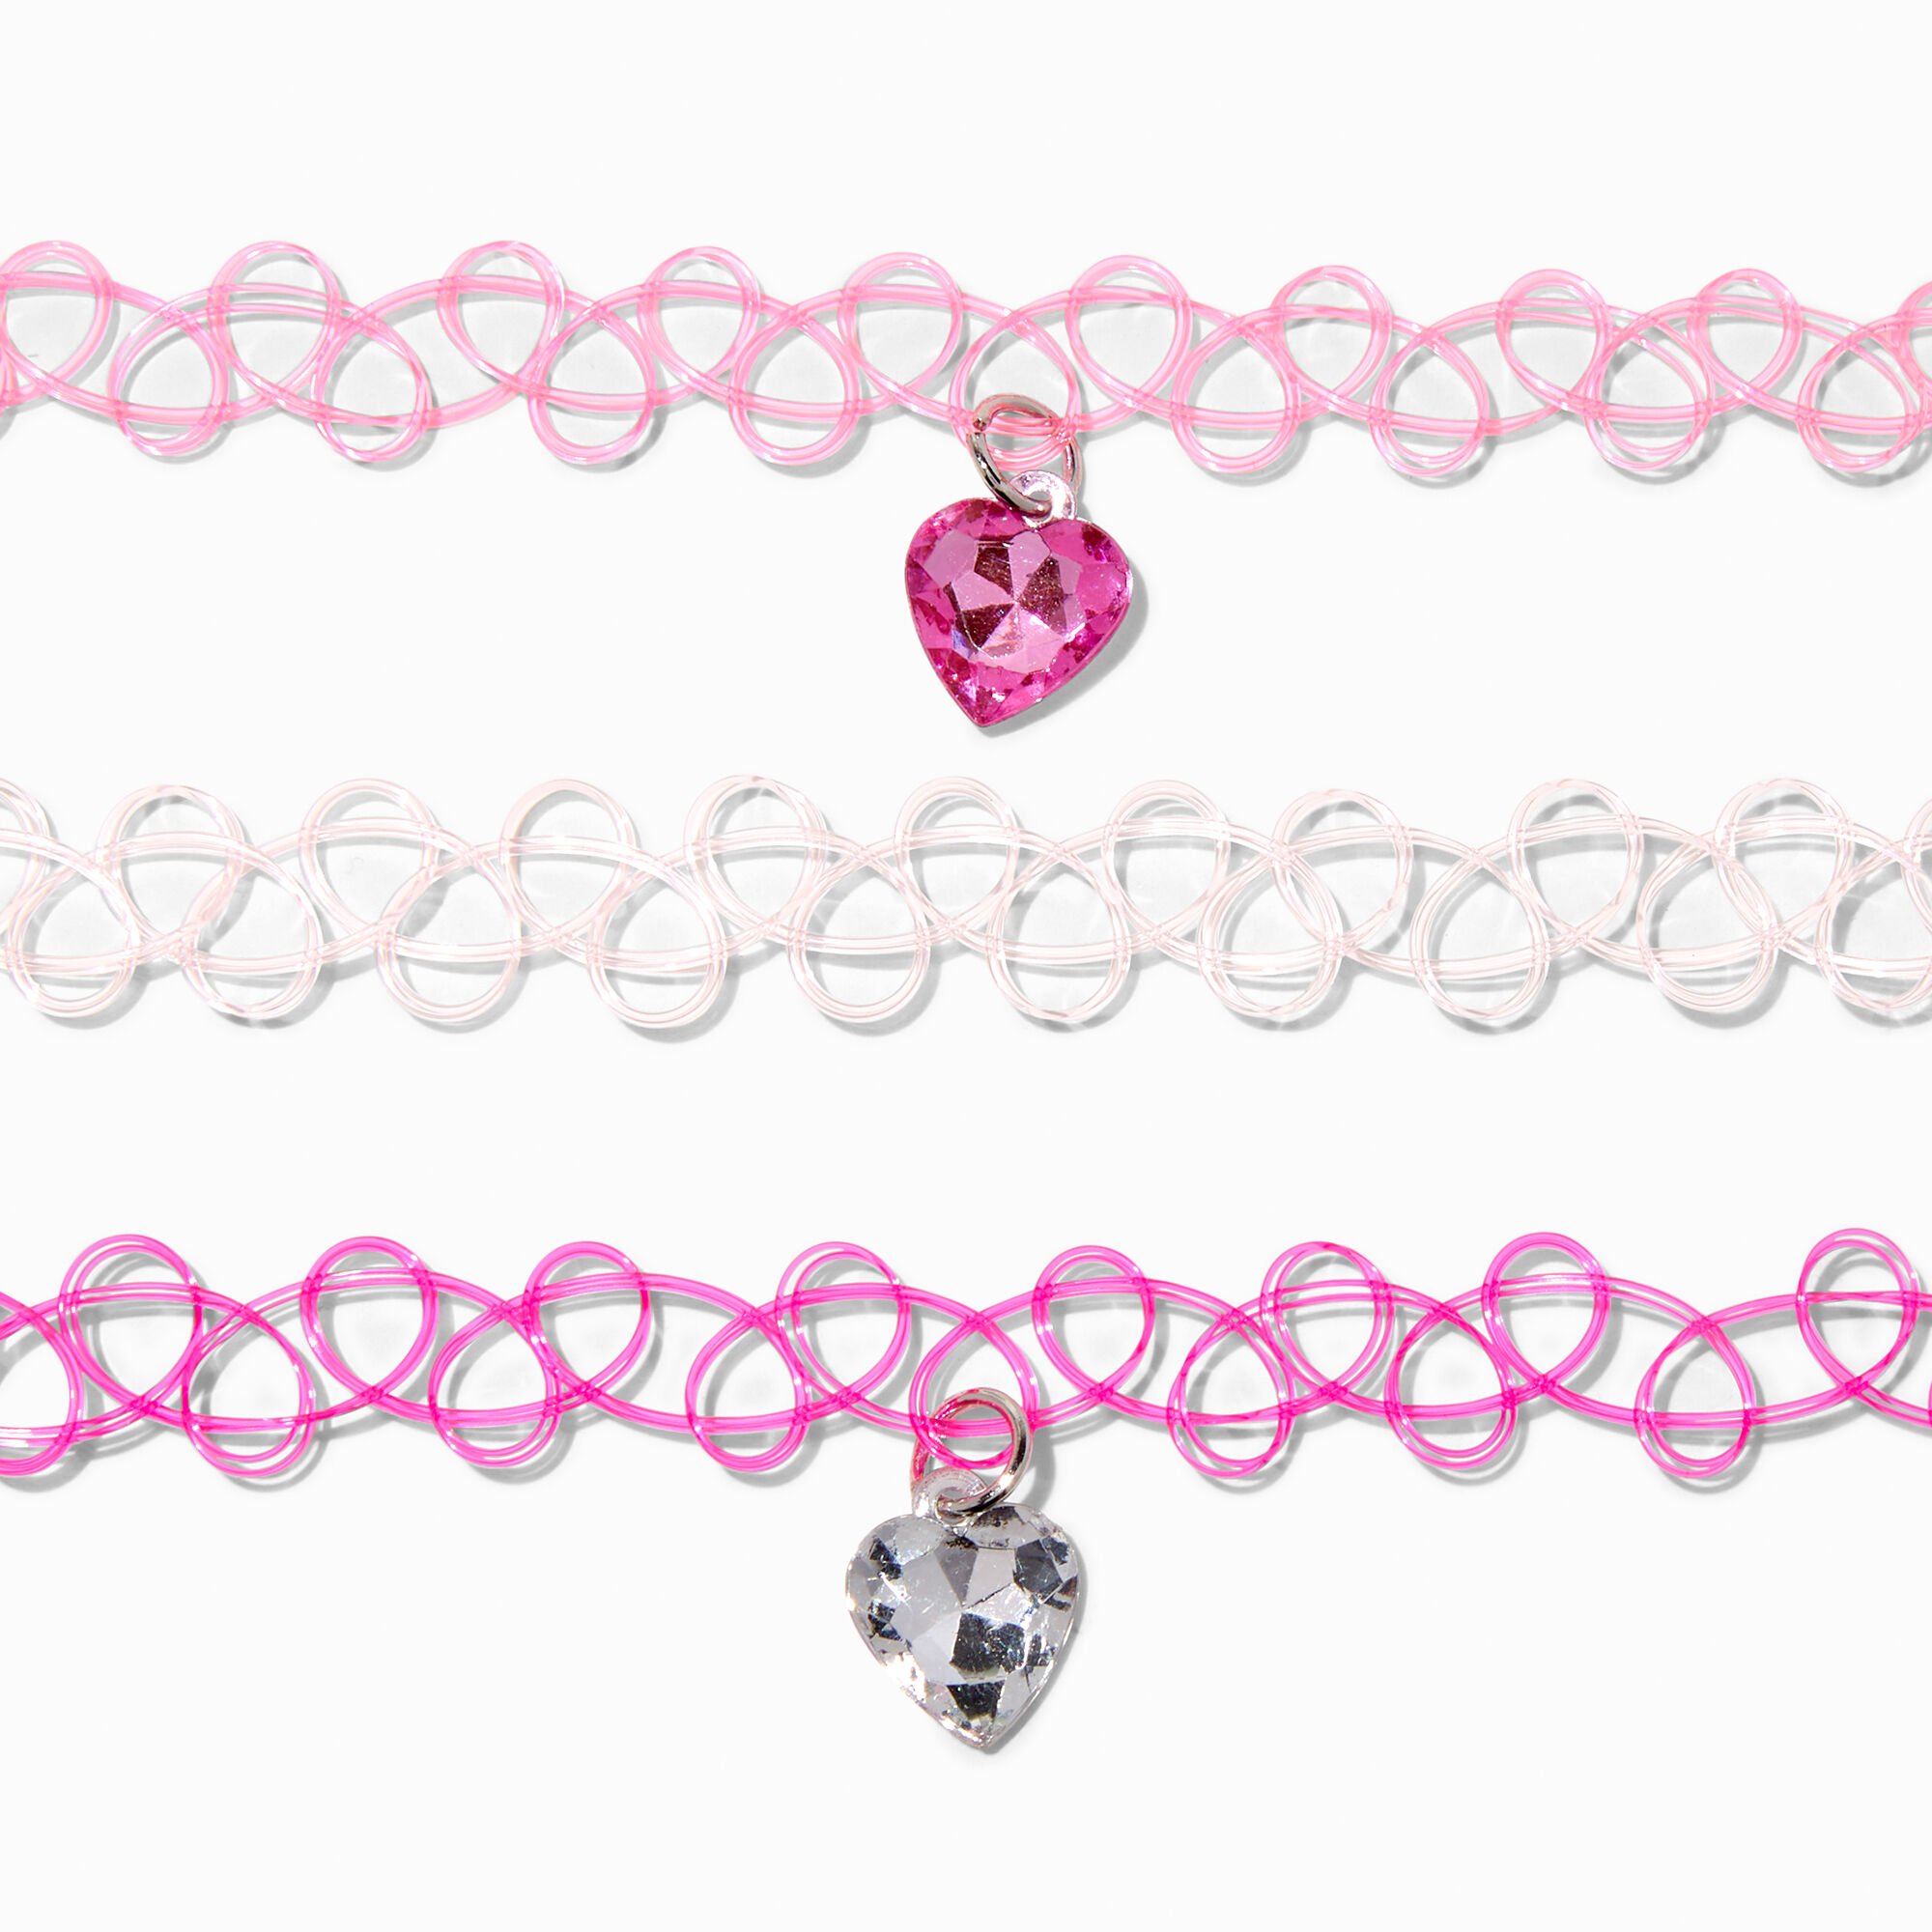 View Claires Club Hot Choker Set 3 Pack Pink information